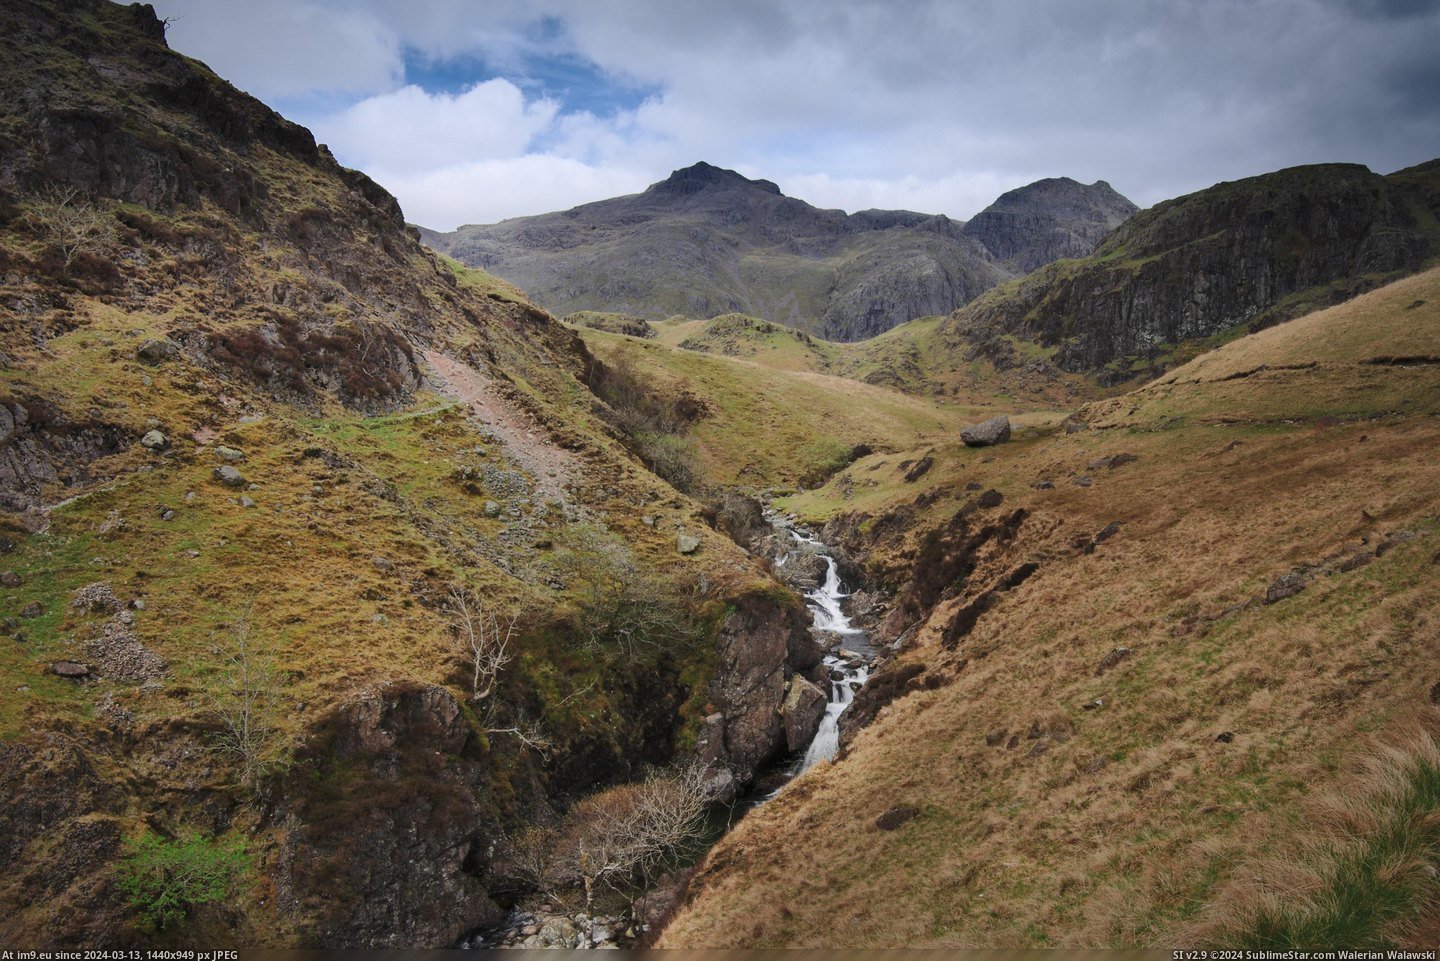 #Lake #District #Revelation #Upper #Gorge [Earthporn] Revelation from the Gorge, Upper Eskdale, Lake District  (3790x2509 Pic. (Изображение из альбом My r/EARTHPORN favs))